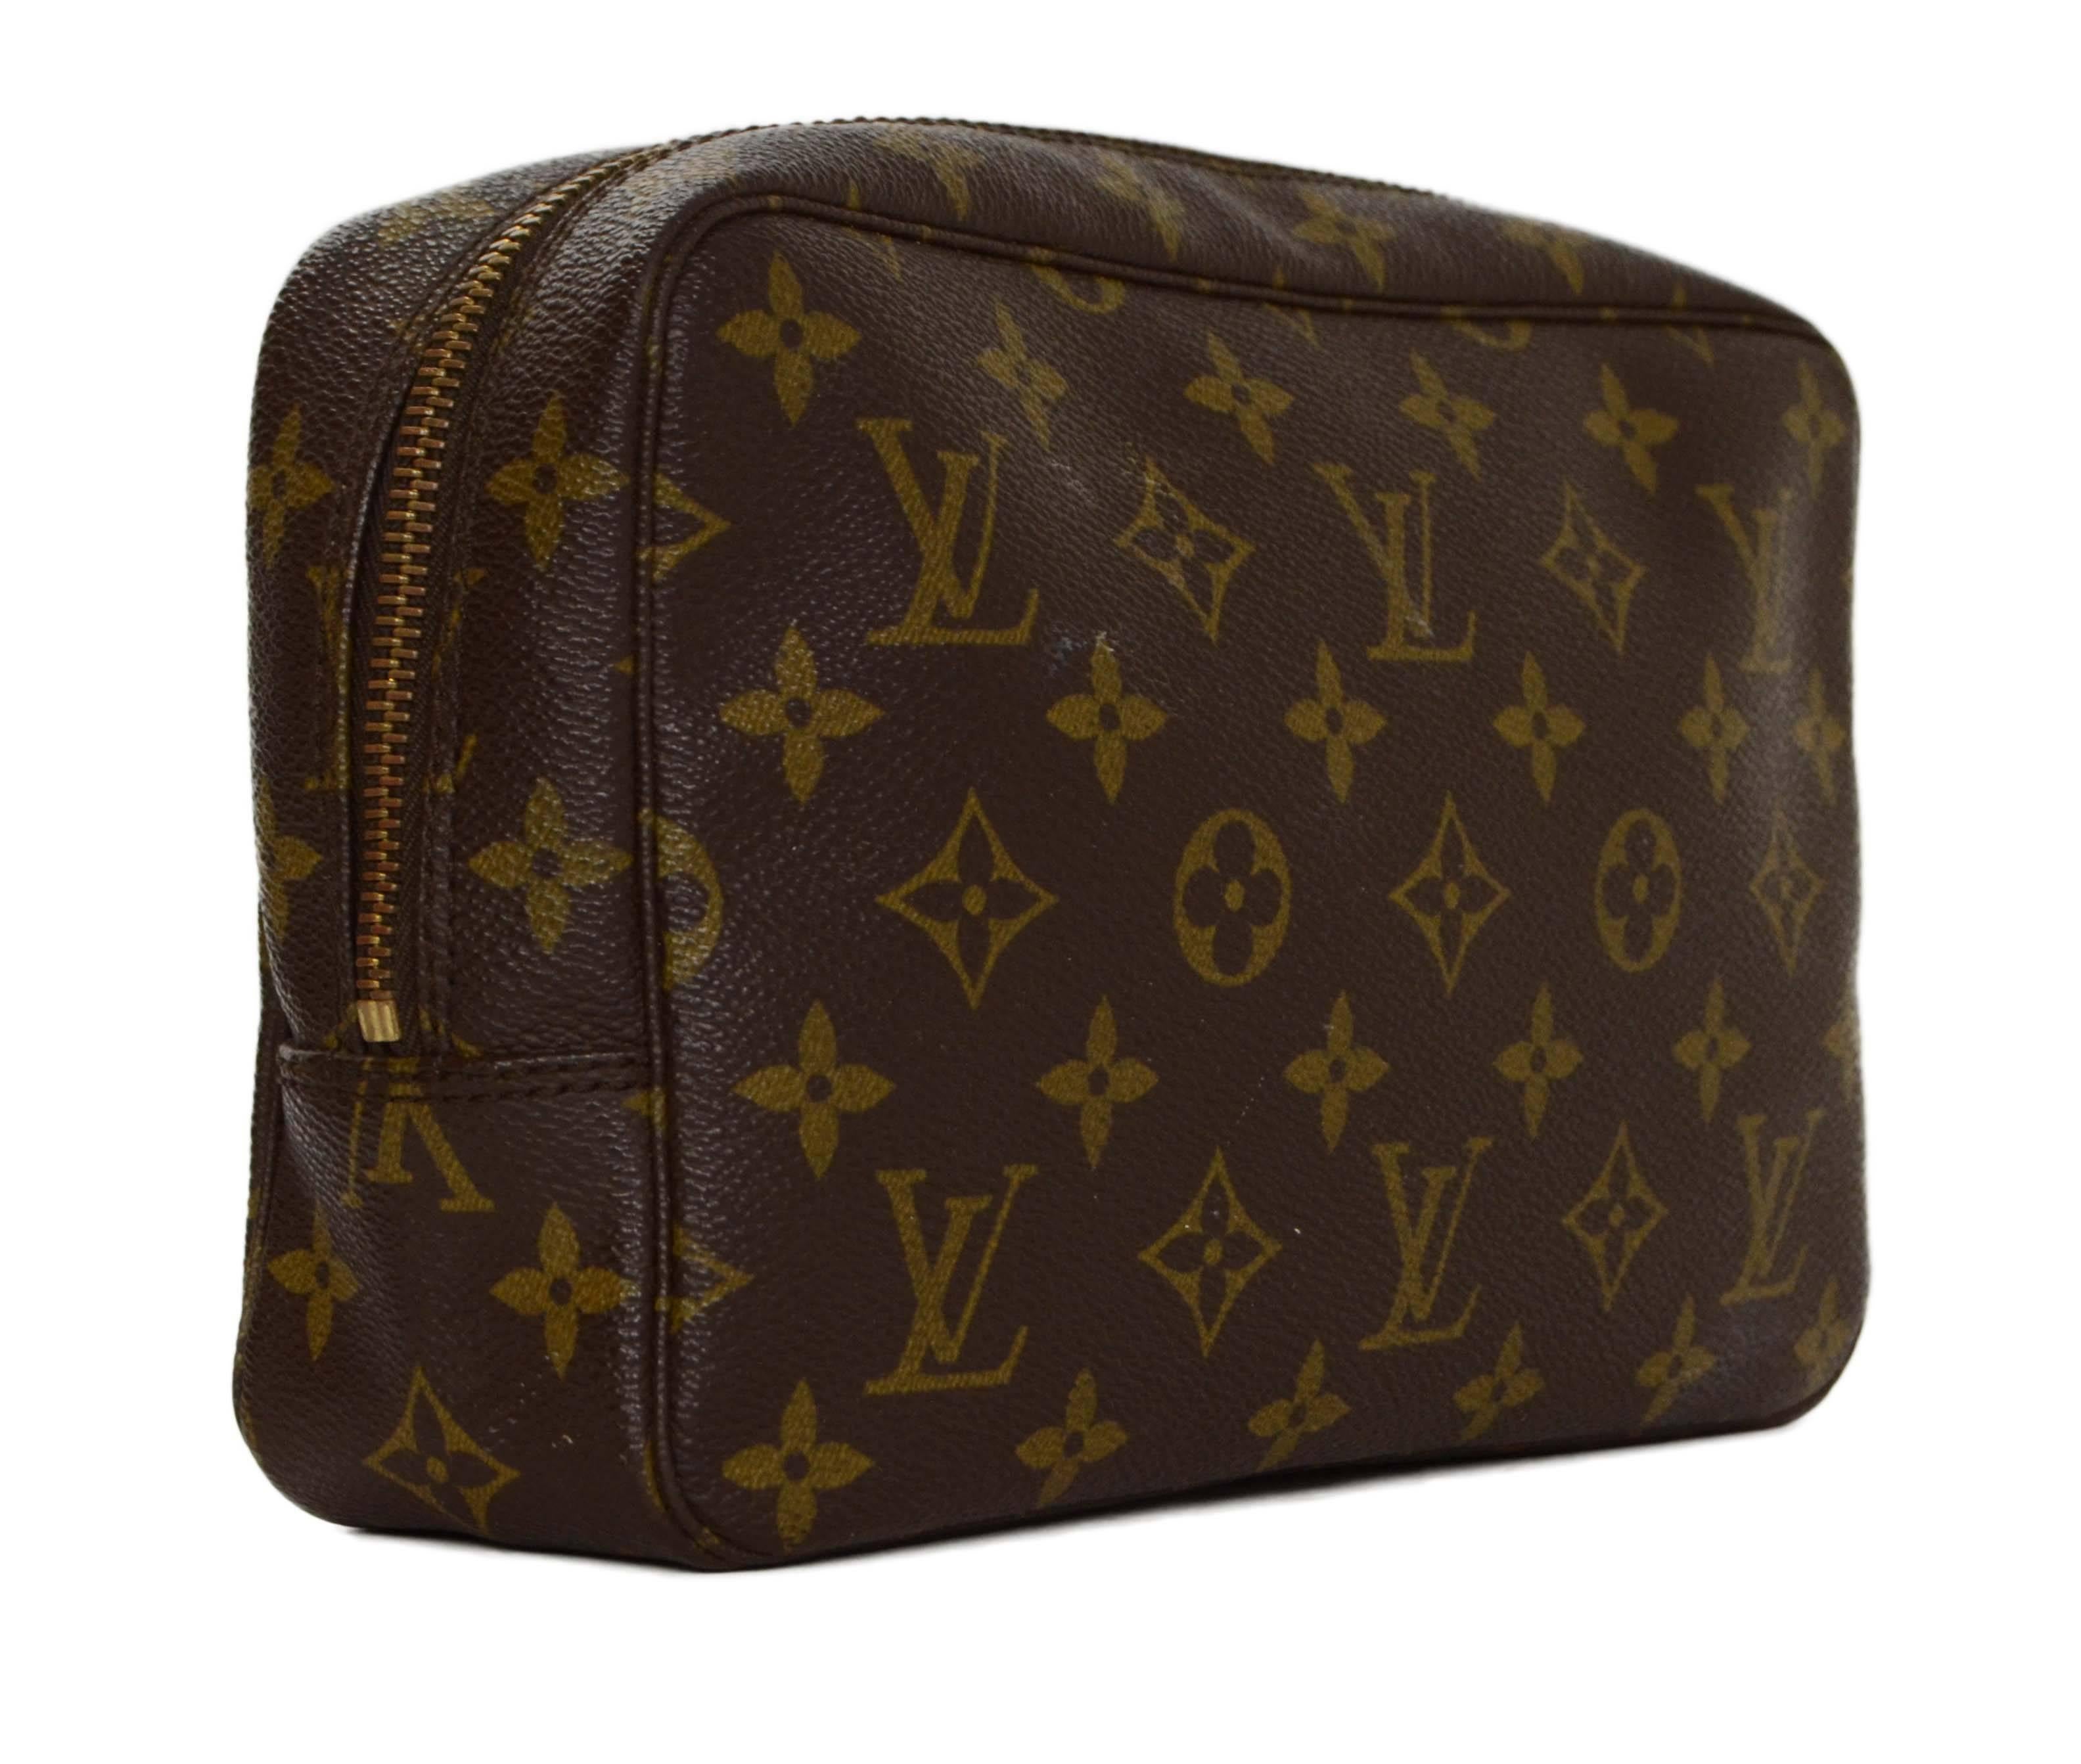 Louis Vuitton Vintage '87 Monogram Canvas Toiletry Pouch
Made In: France
Year of Production: 1987
Color: Brown
Hardware: Goldtone
Materials: Coated Canvas and metal
Lining: Beige leather
Closure: Zip around closure
Exterior Pockets: